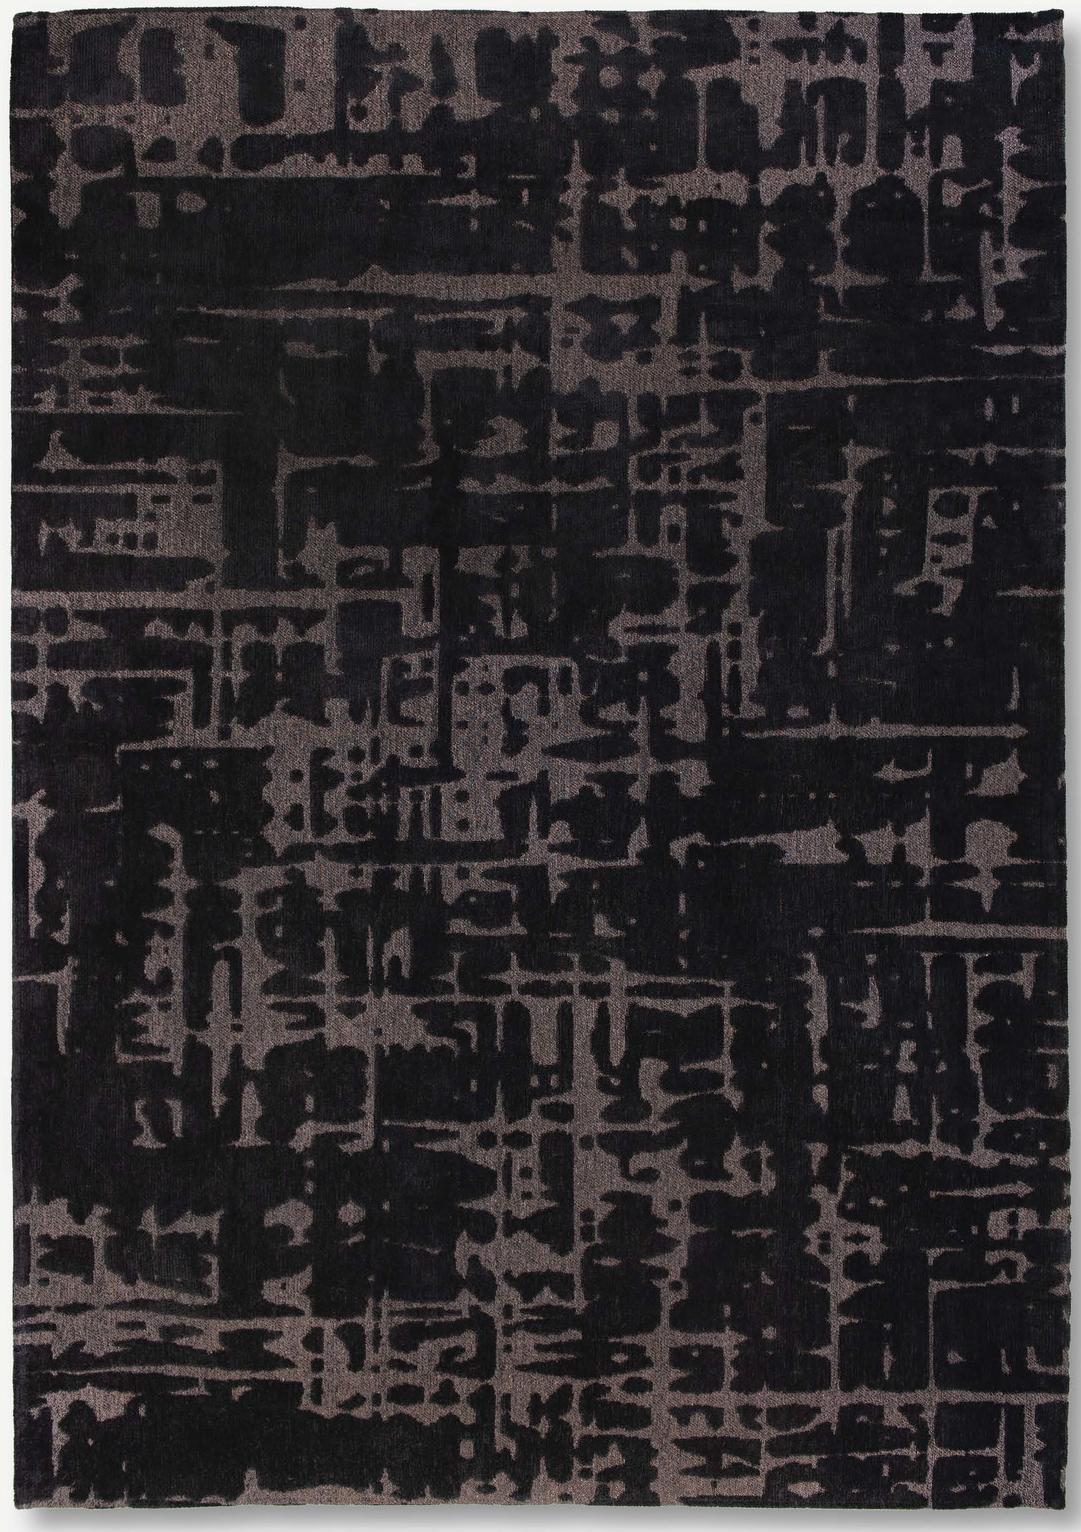 Abstract Black Belgian Rug ☞ Size: 8' x 11' 2" (240 x 340 cm)